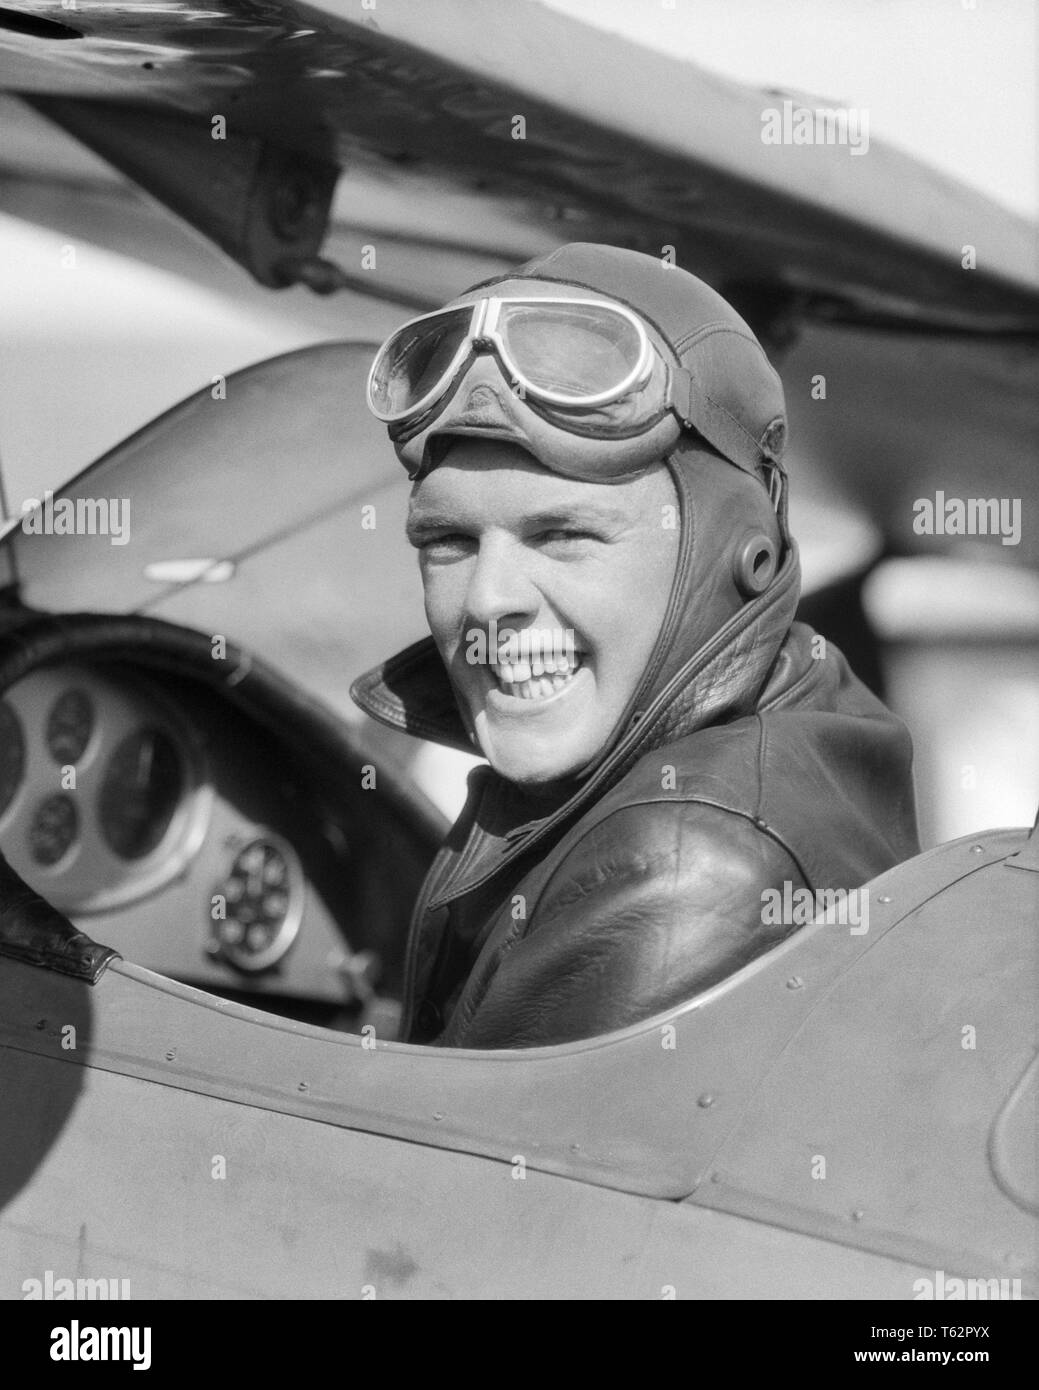 1930s MAN PILOT SITTING IN OPEN AIR COCKPIT SMILING LOOKING OVER HIS SHOULDER  - a4425 HAR001 HARS WELCOME PLEASED JOY LIFESTYLE PLANES JOBS PERSONS GOGGLES MALES TRANSPORTATION EXPRESSIONS B&W EYE CONTACT SKILL OCCUPATION HAPPINESS SKILLS HEAD AND SHOULDERS CHEERFUL ADVENTURE AIRPLANES HIS EXCITEMENT AUTHORITY AVIATION OCCUPATIONS SMILES COCKPIT AVIATOR JOYFUL MID-ADULT MID-ADULT MAN BIPLANE BLACK AND WHITE BRAVE CAUCASIAN ETHNICITY HAR001 OLD FASHIONED Stock Photo